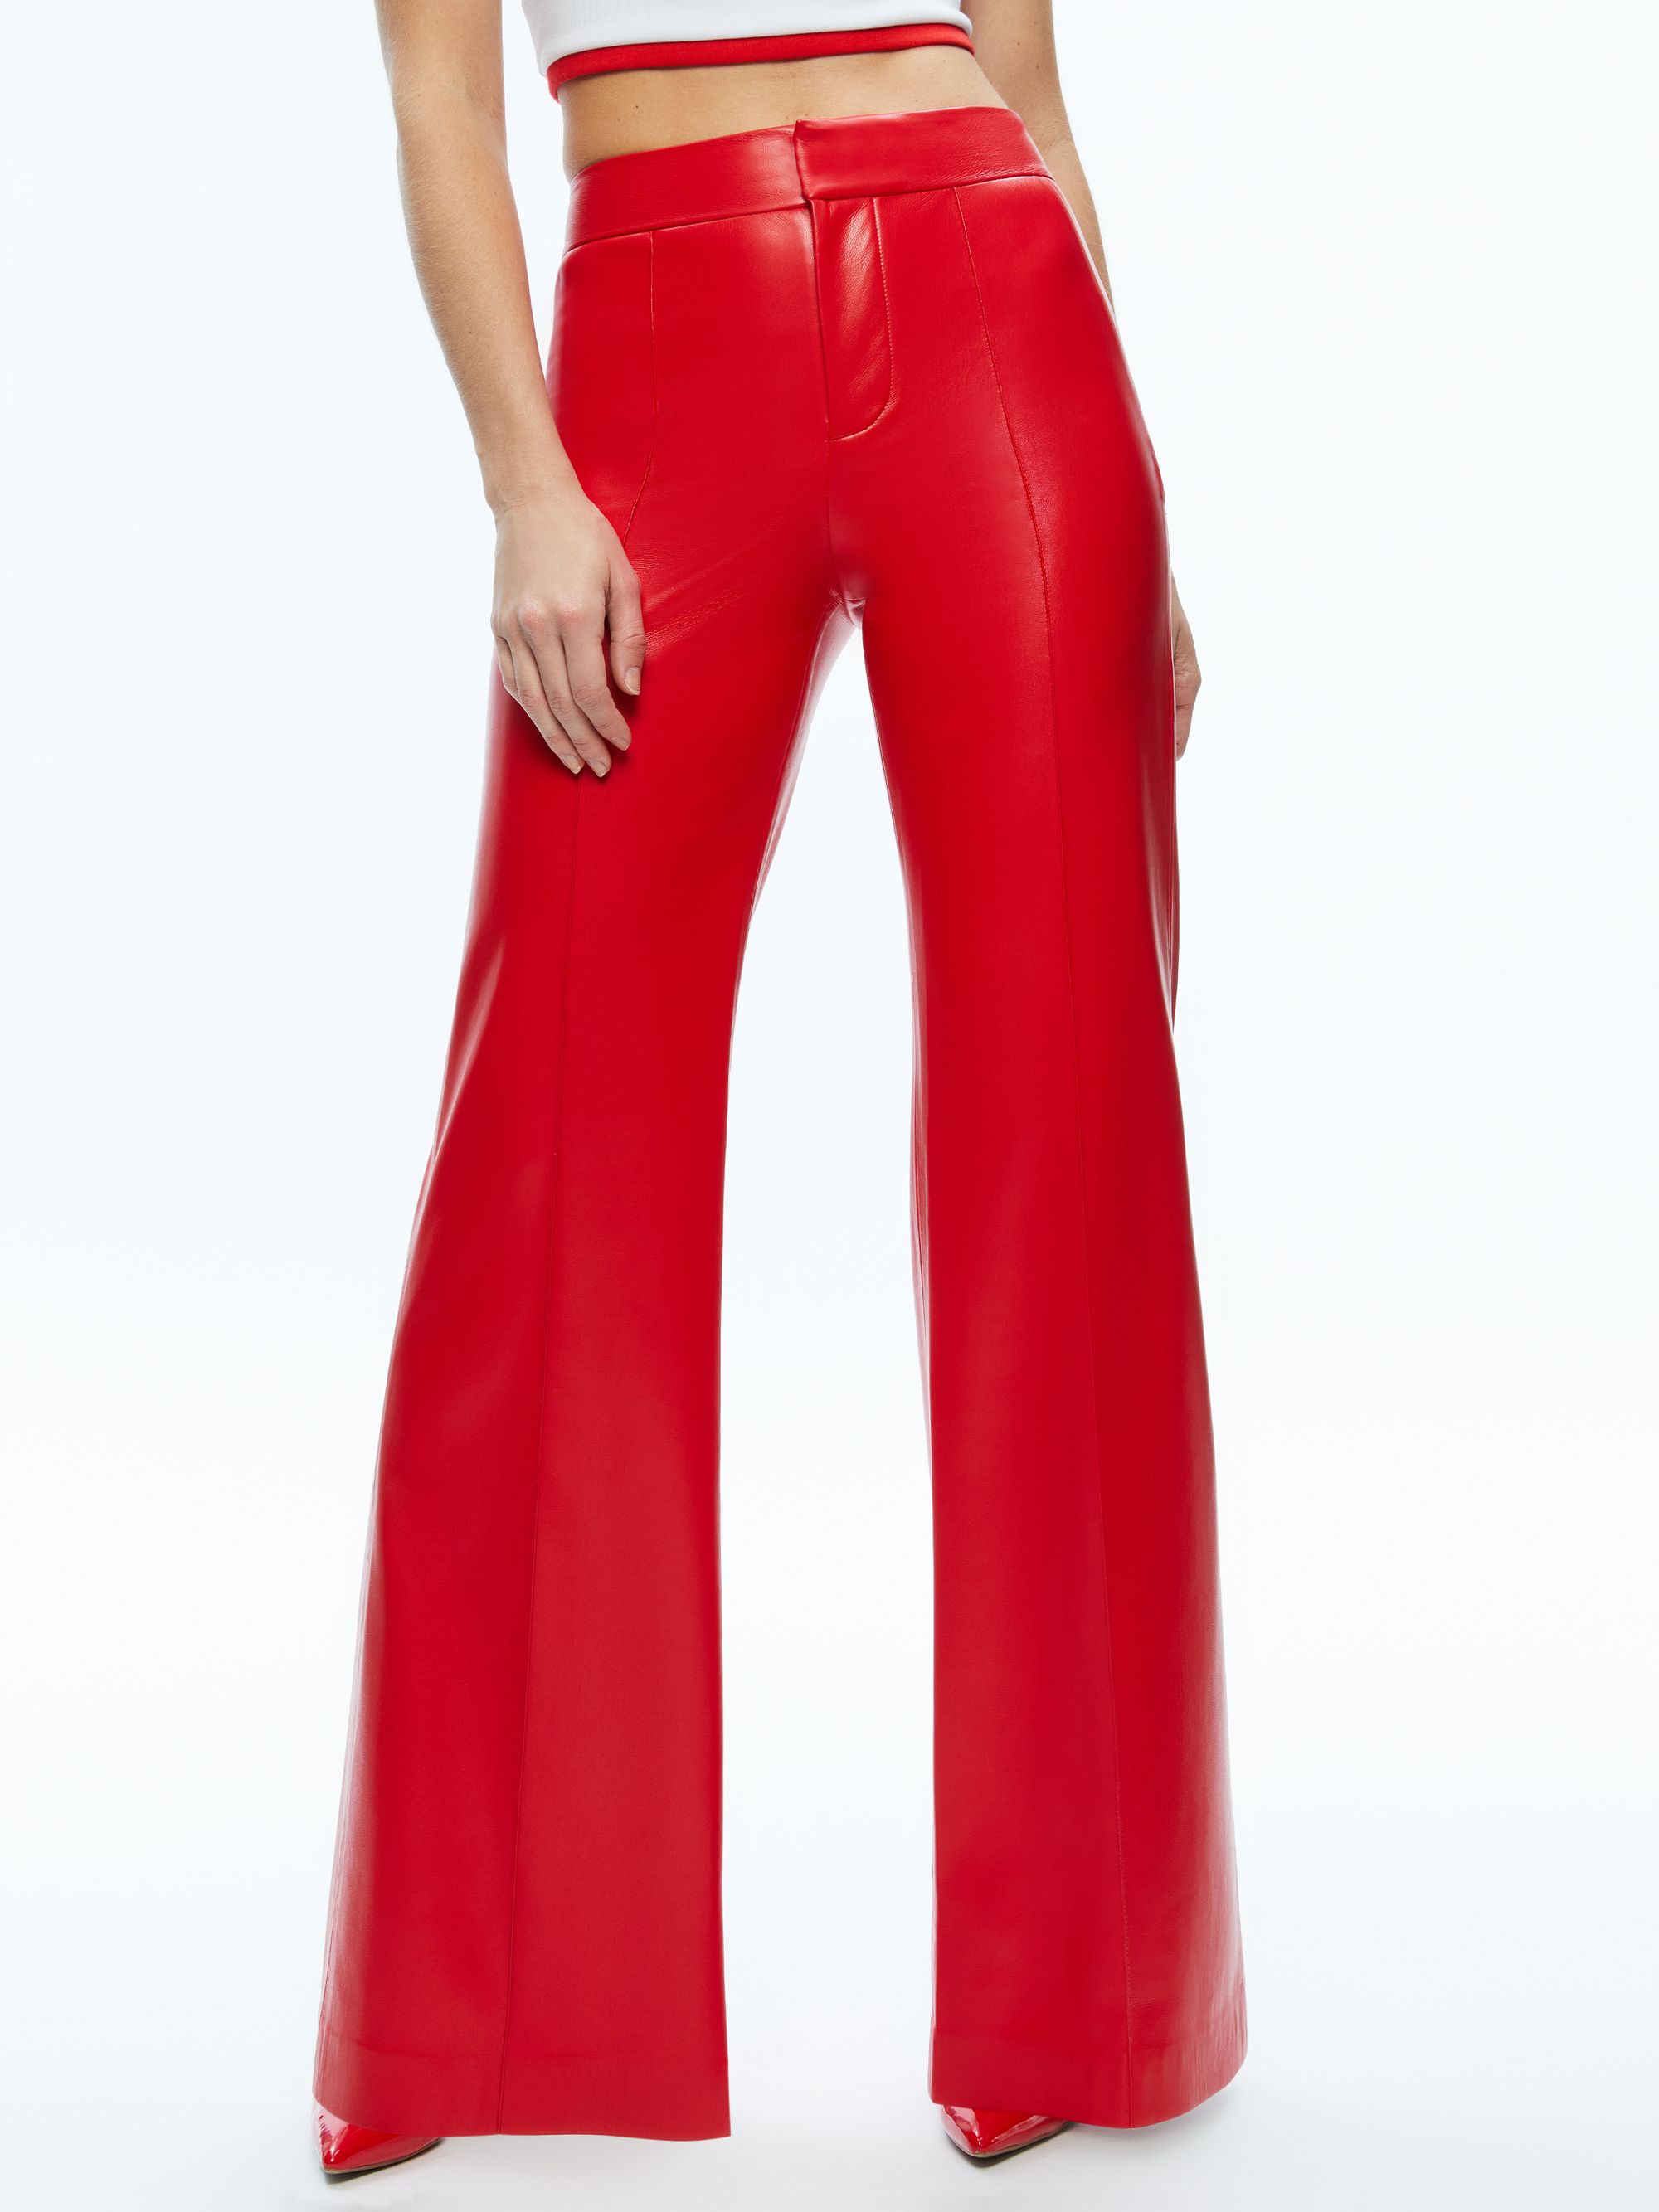 DYLAN HIGH WAISTED VEGAN LEATHER WIDE LEG PANT | Alice + Olivia